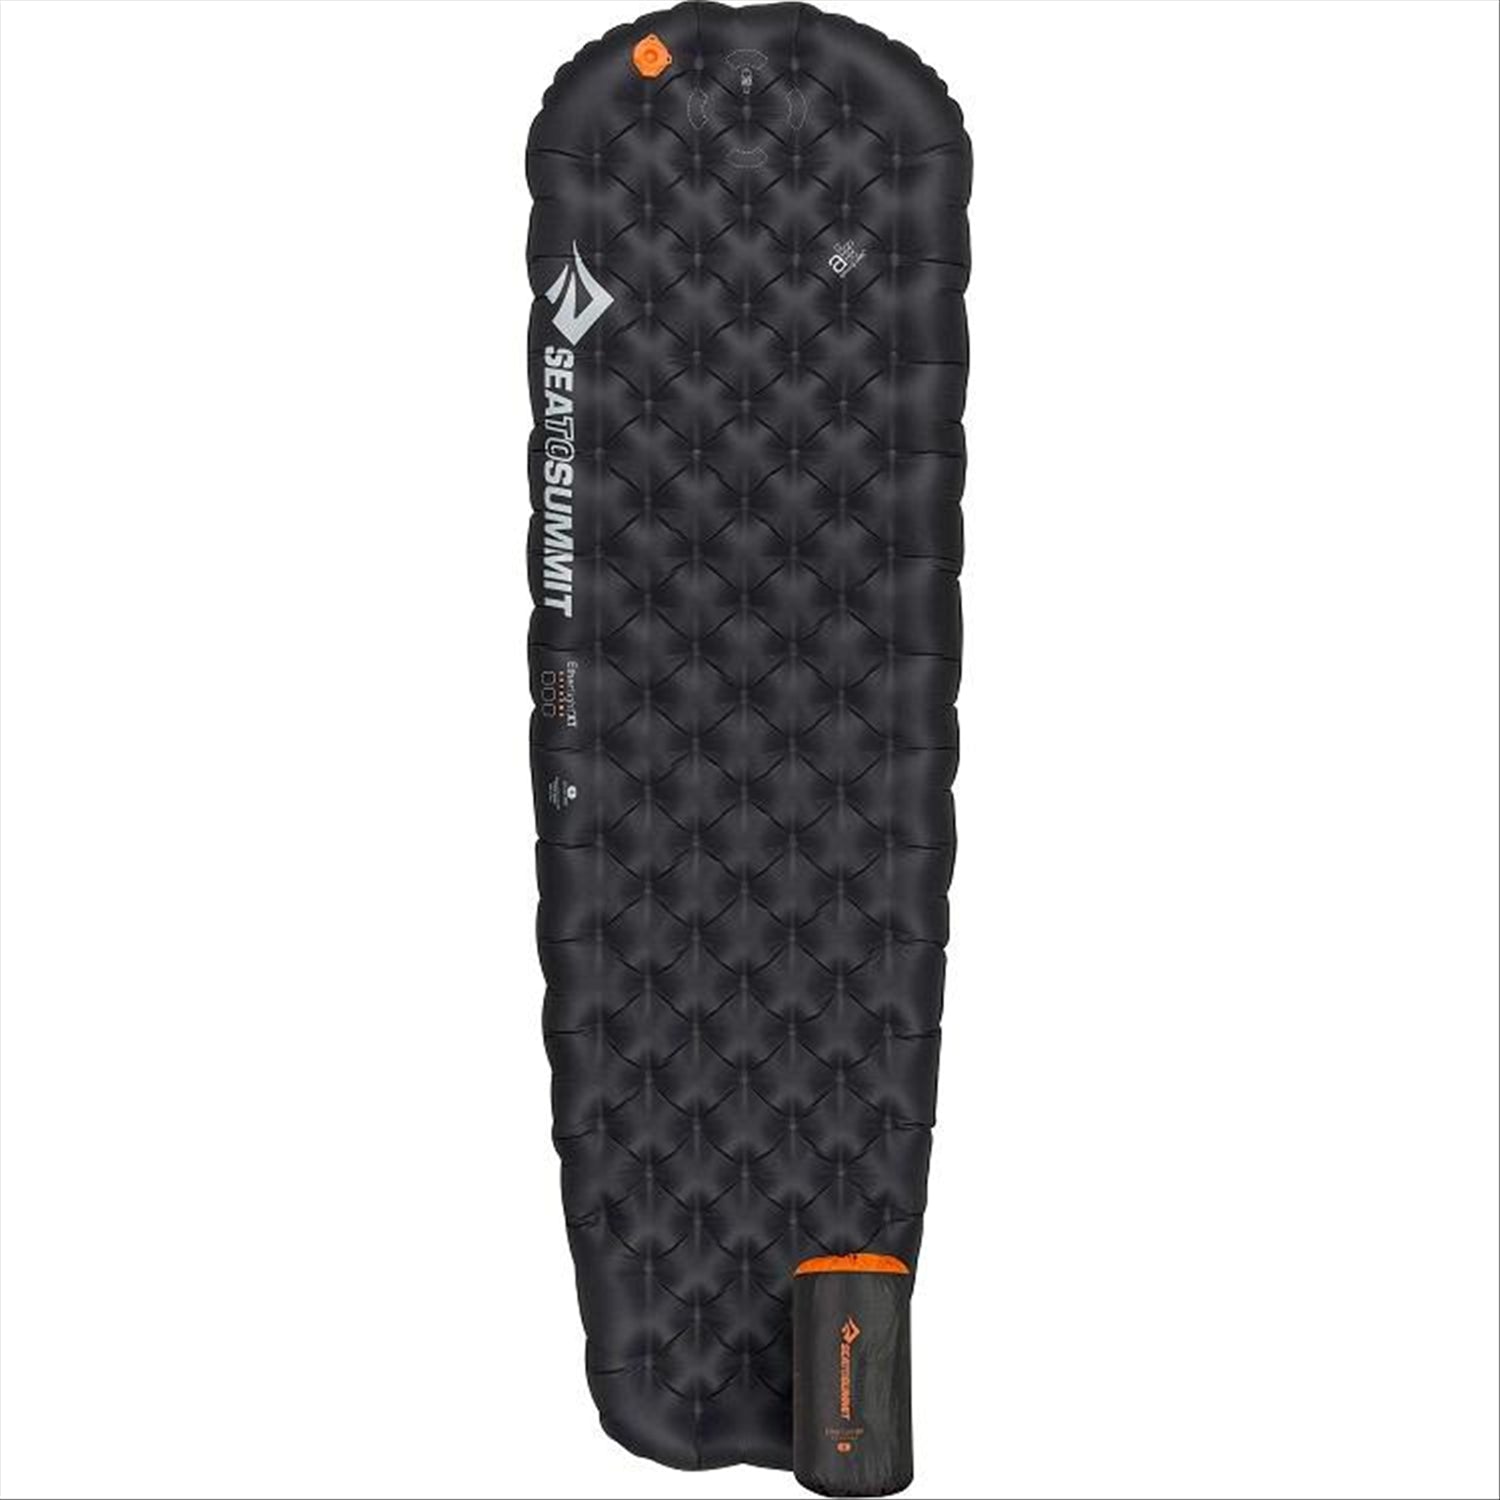 Sea to Summit Sea To Summit Ether Light XT Etreme Insulated Sleeping Mat, R-Value 6.2, 10cm thick